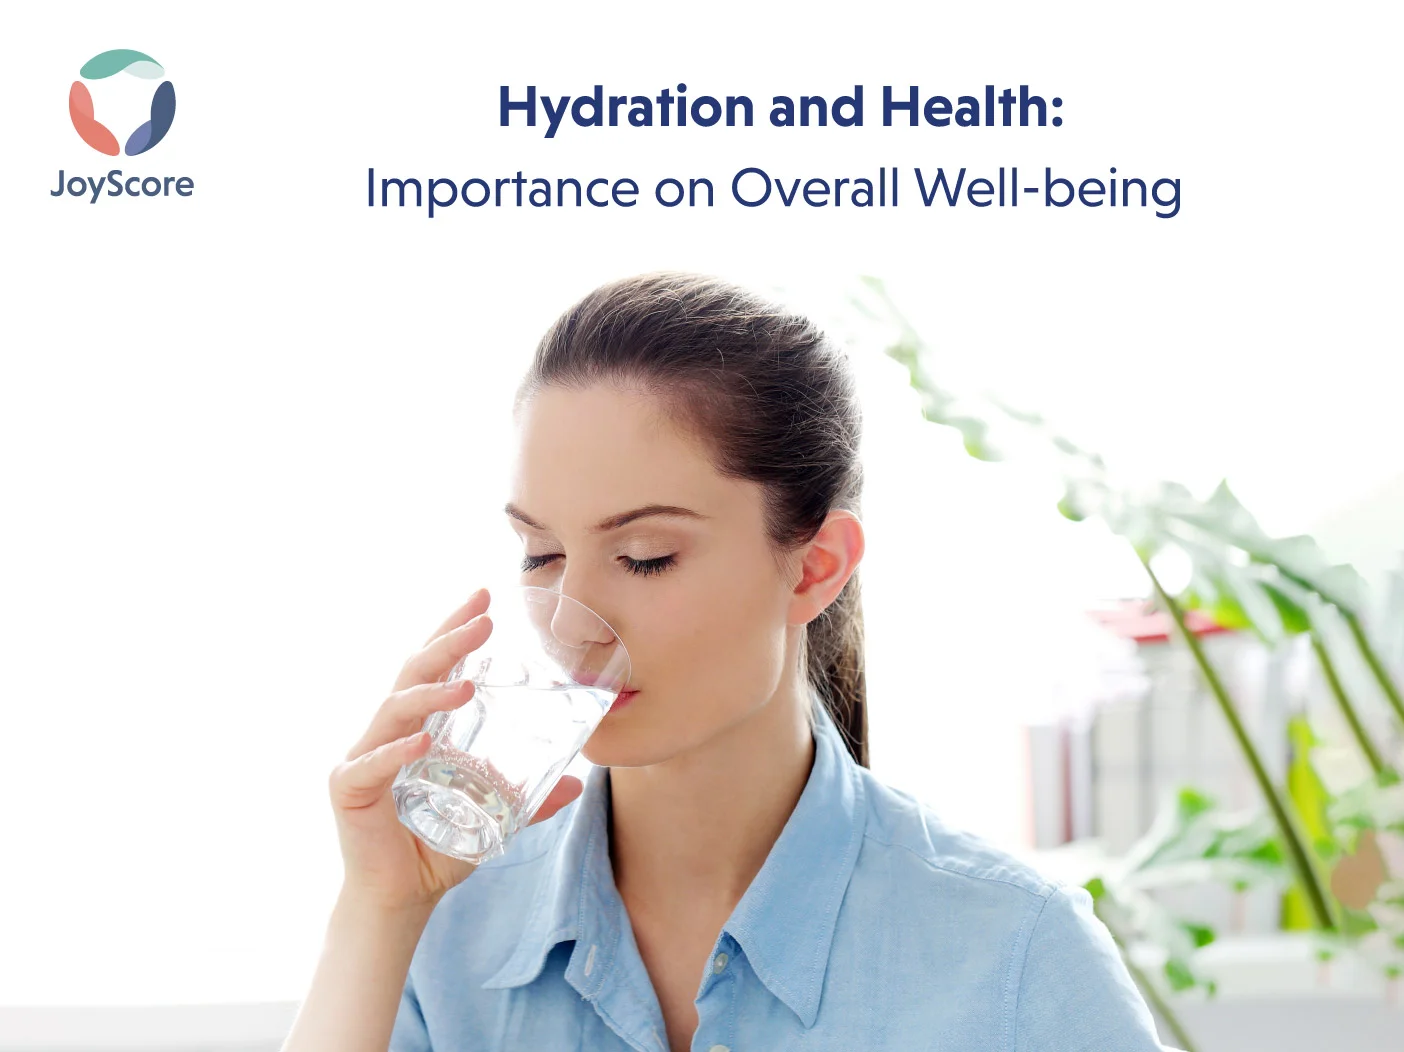 Hydration and Health: Importance of Staying Well-Hydrated for Overall Well-being